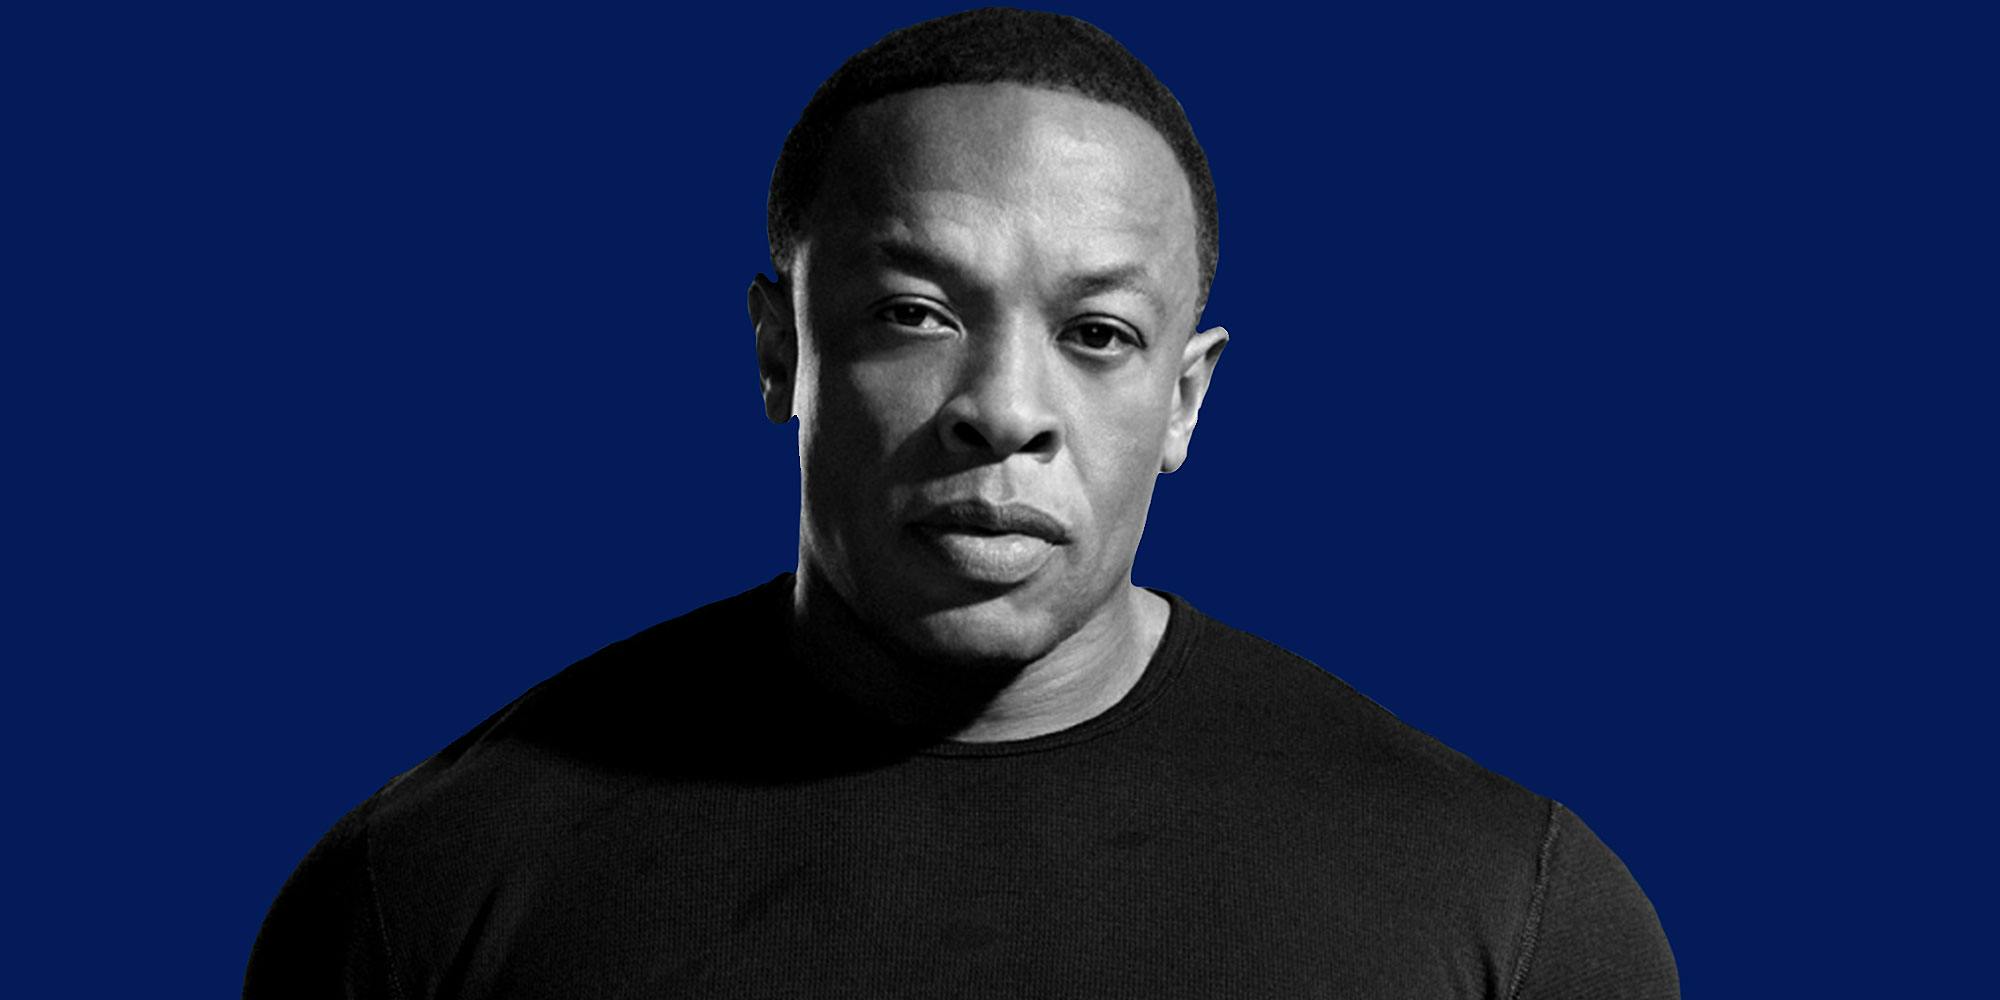 'Chronic by Dre' Cannabis Brand Planned Without Dre's Permission. Here, a photo of Dre is shown.